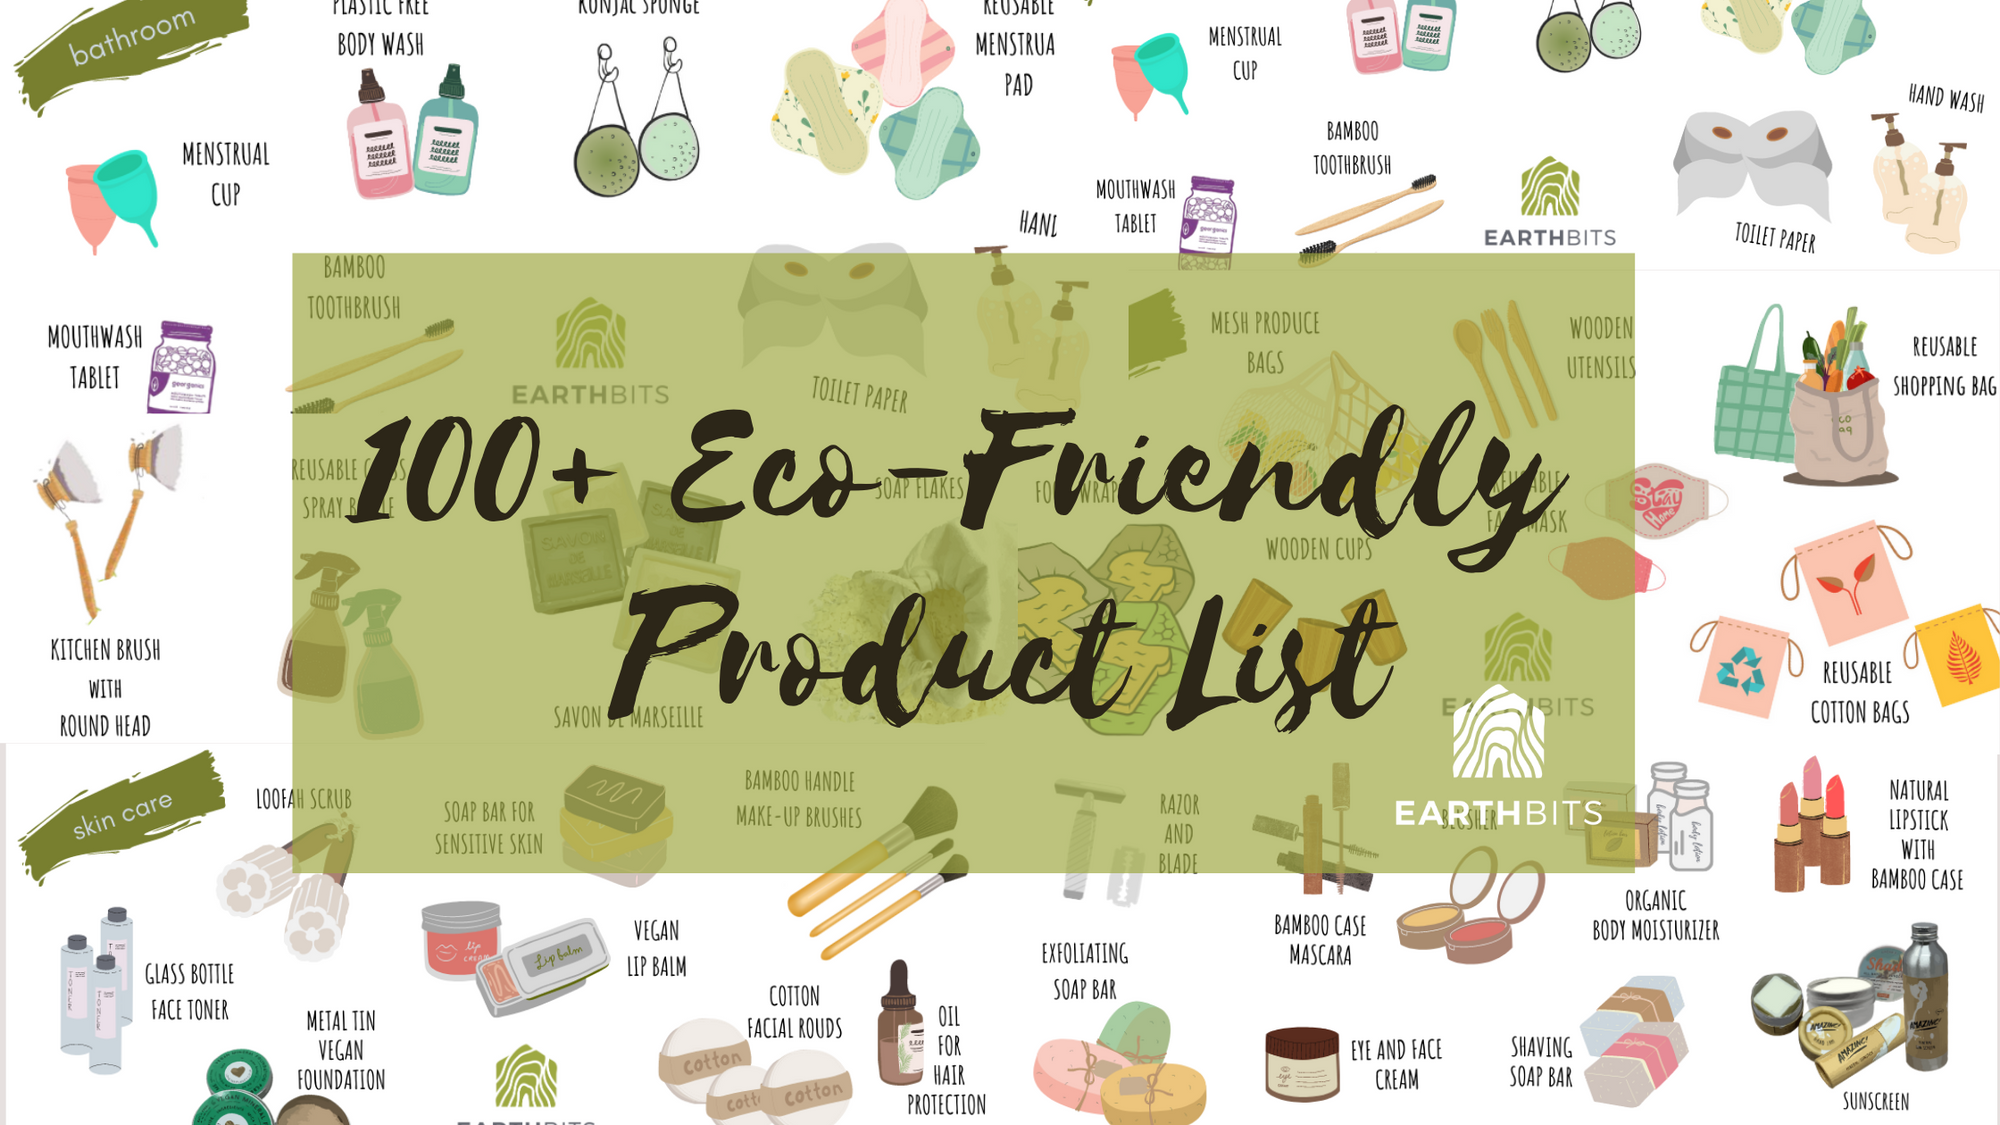 20 Eco-Friendly Products to Replace the Single-Use Disposable